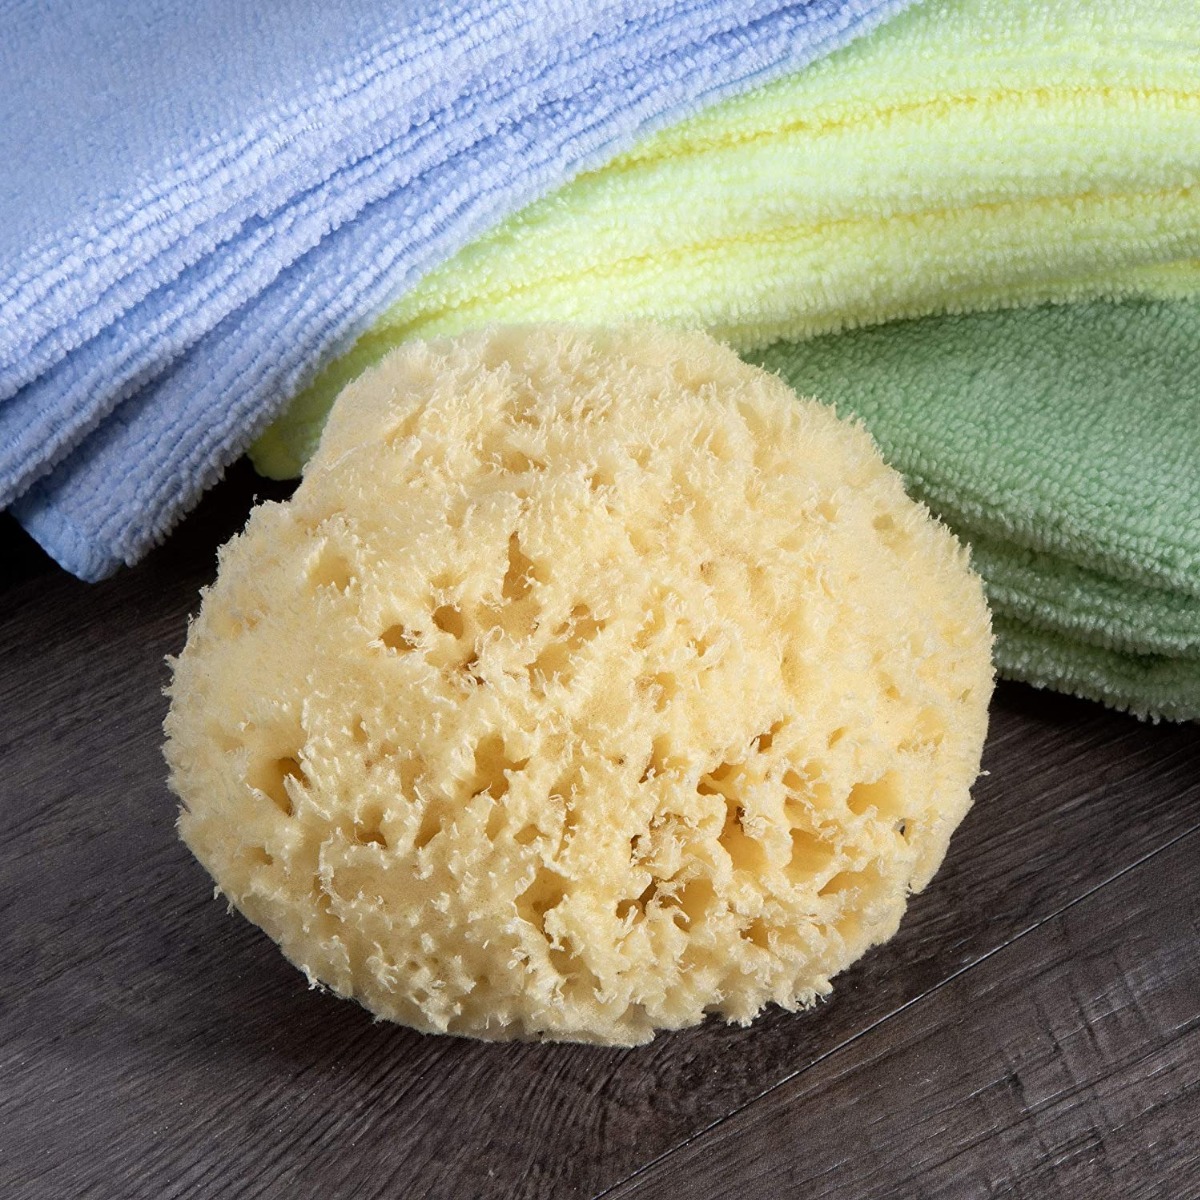 How to Clean and Care for your Natural Bath Sponge